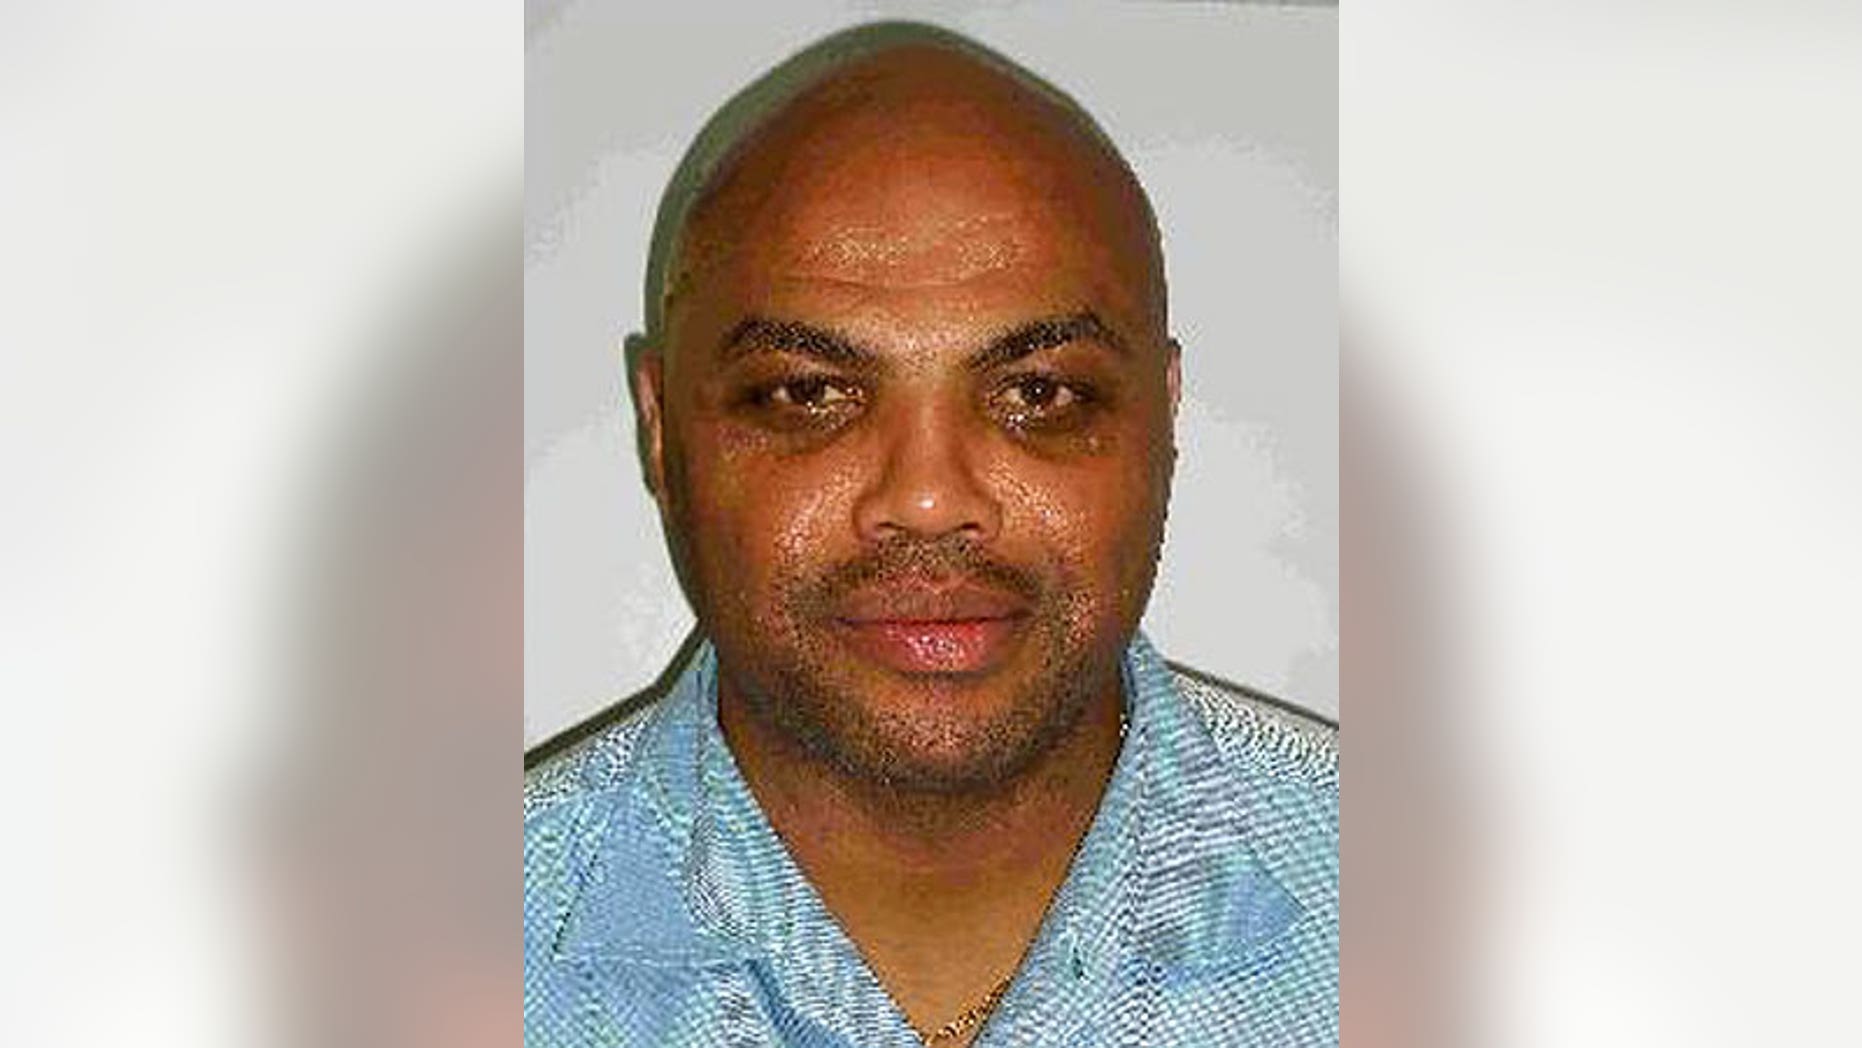 Police Report Charles Barkley In A Hurry For Sex Fox News